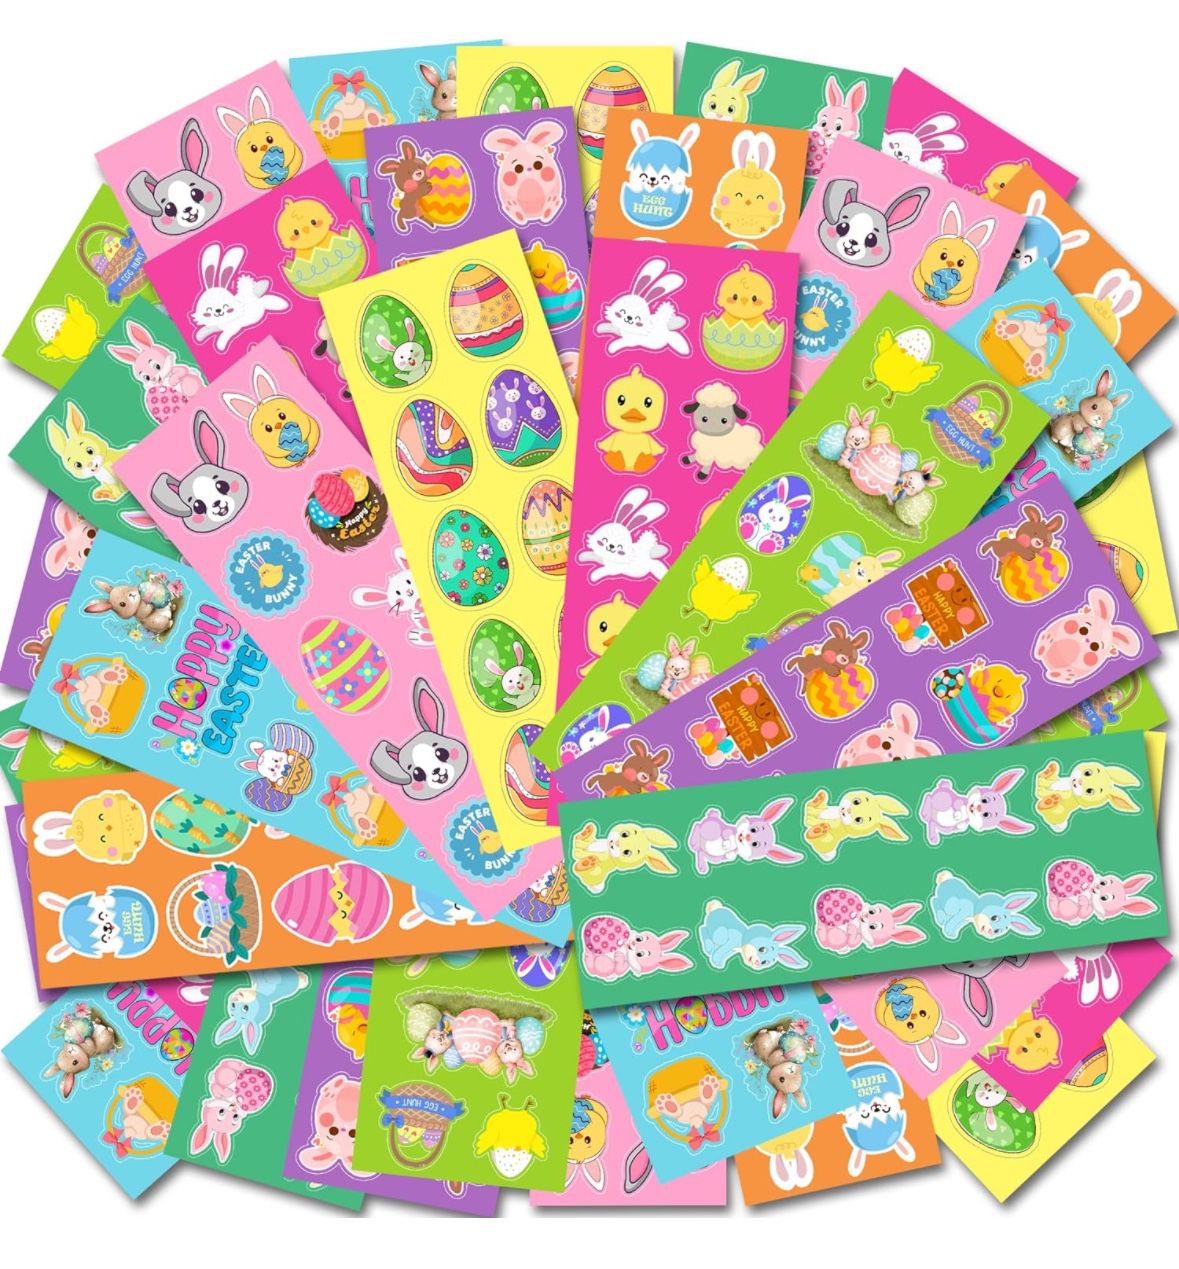 Easter Stickers - 400 Pcs Easter Basket Stuffers, Gifts Decorations Toys for Egg,Easter Craft Party